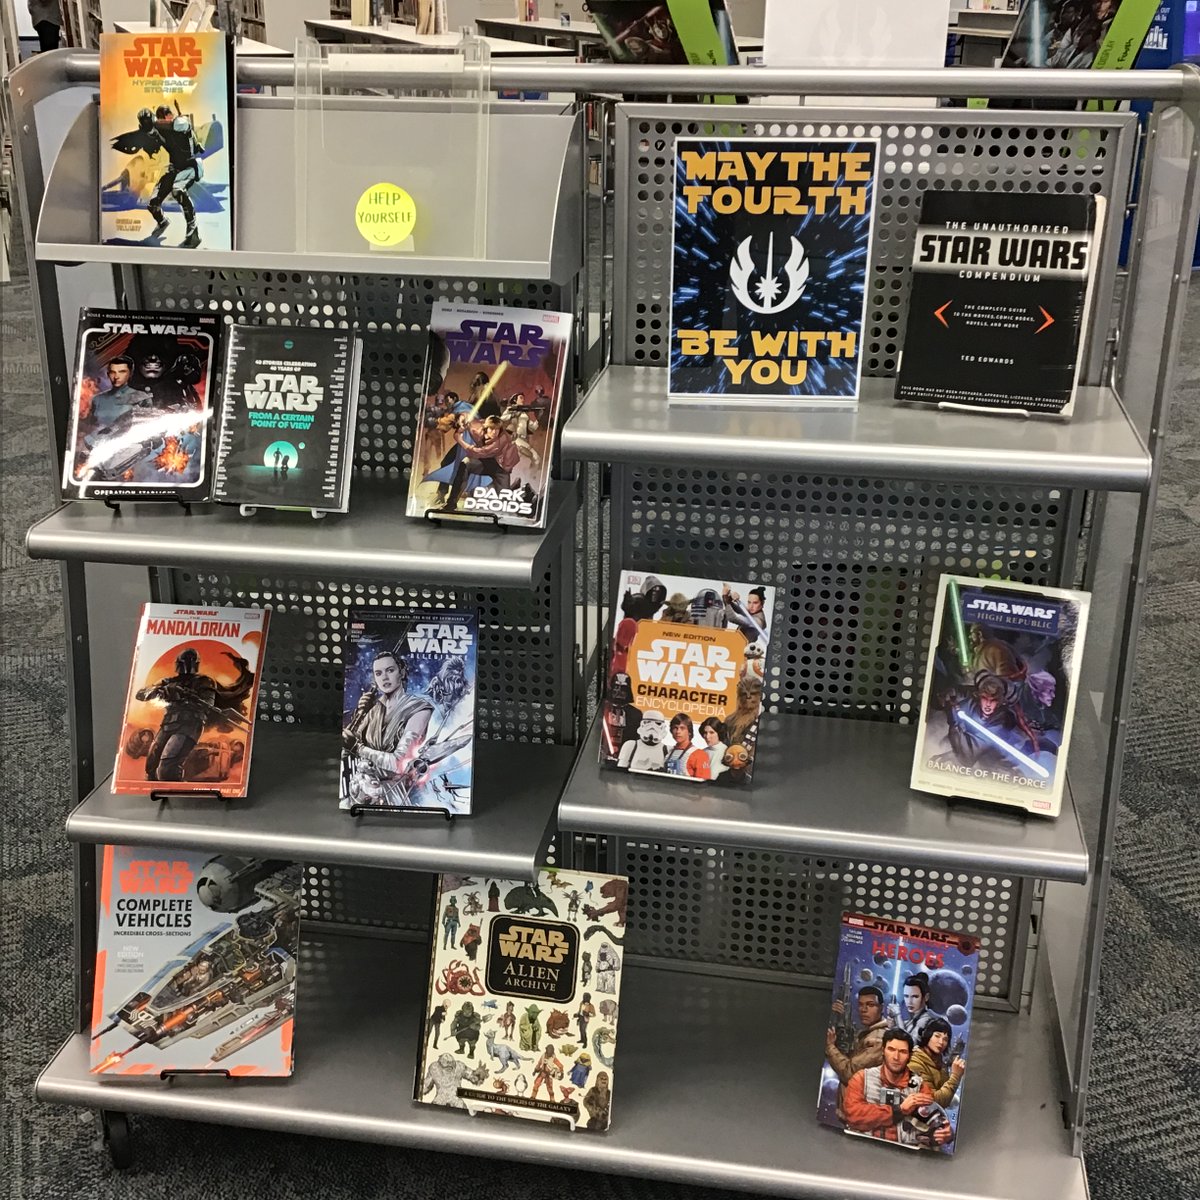 May the 4th may be over, but you can celebrate #StarWars all month long with books, movies, and games from Merrillville's display!